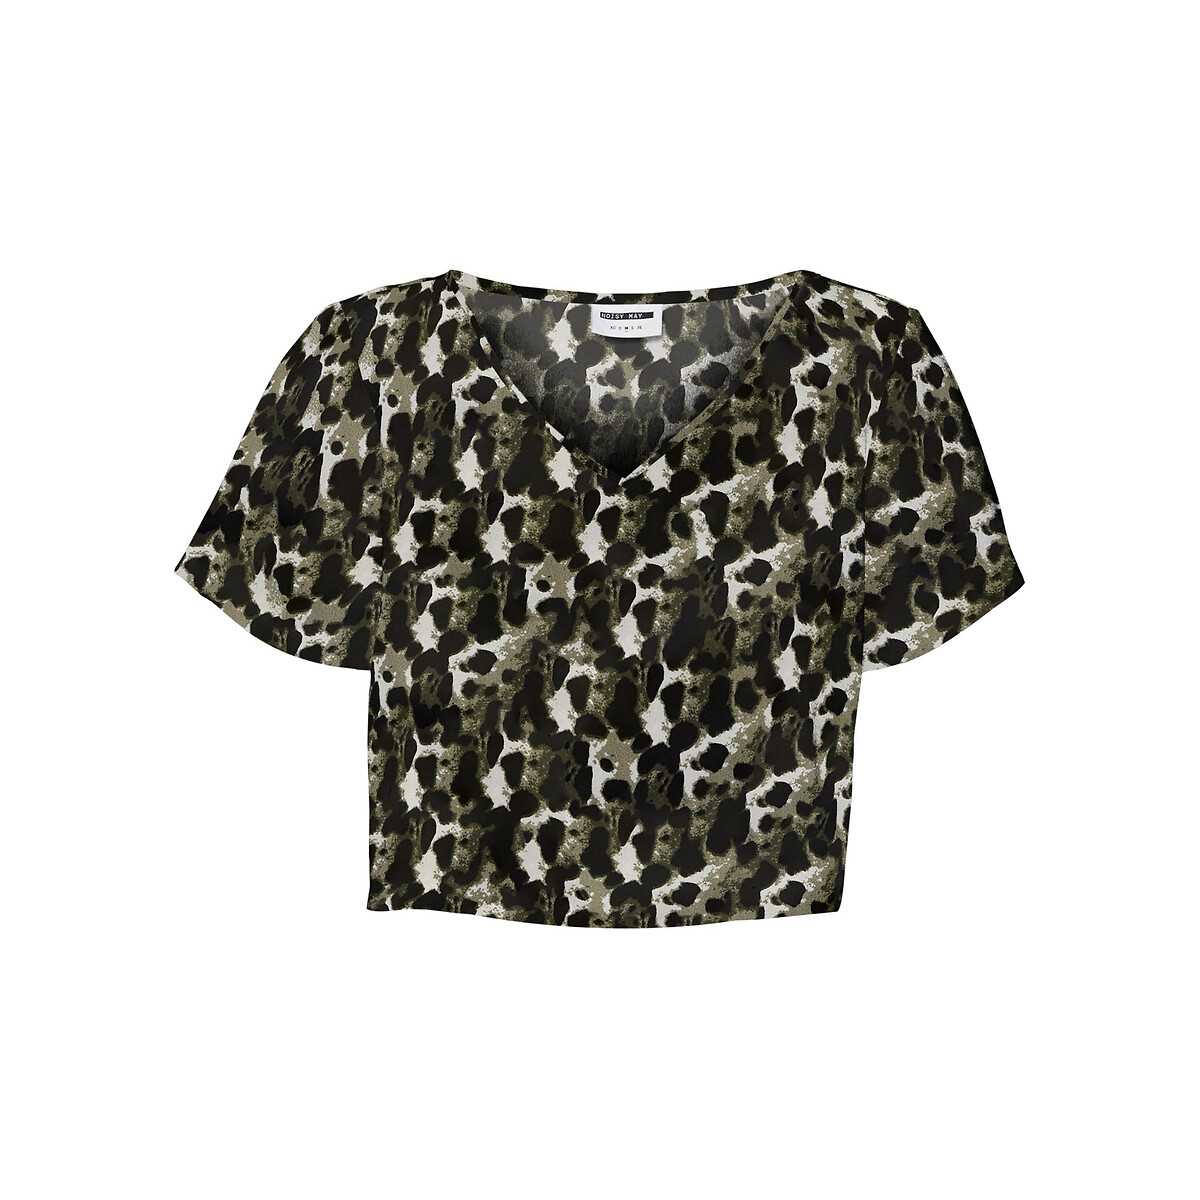 Bedrucktes Cropped T-Shirt von Noisy May